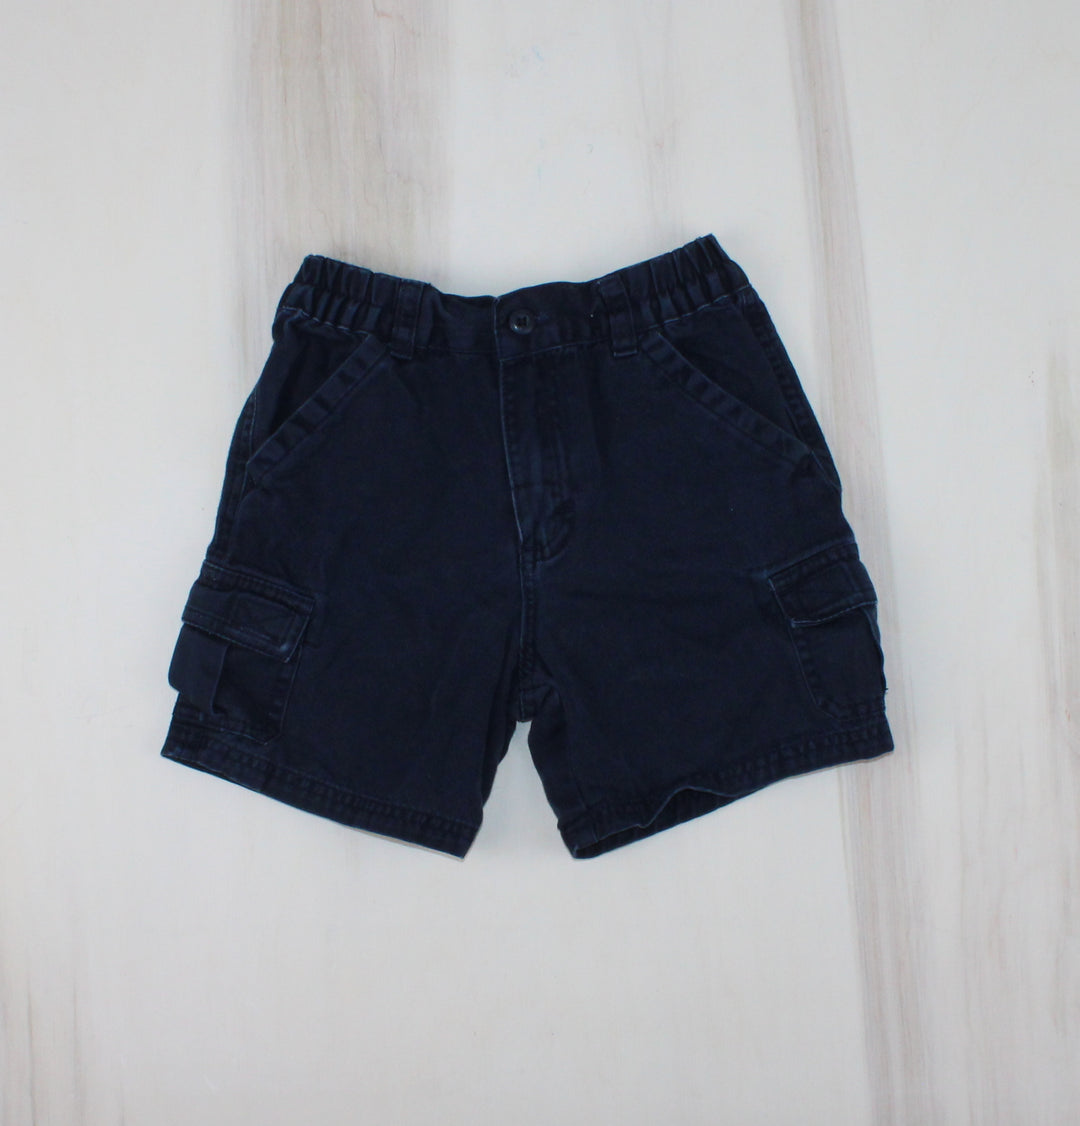 CHILDRENS PLACE NAVY CARGO SHORTS 4Y VGUC